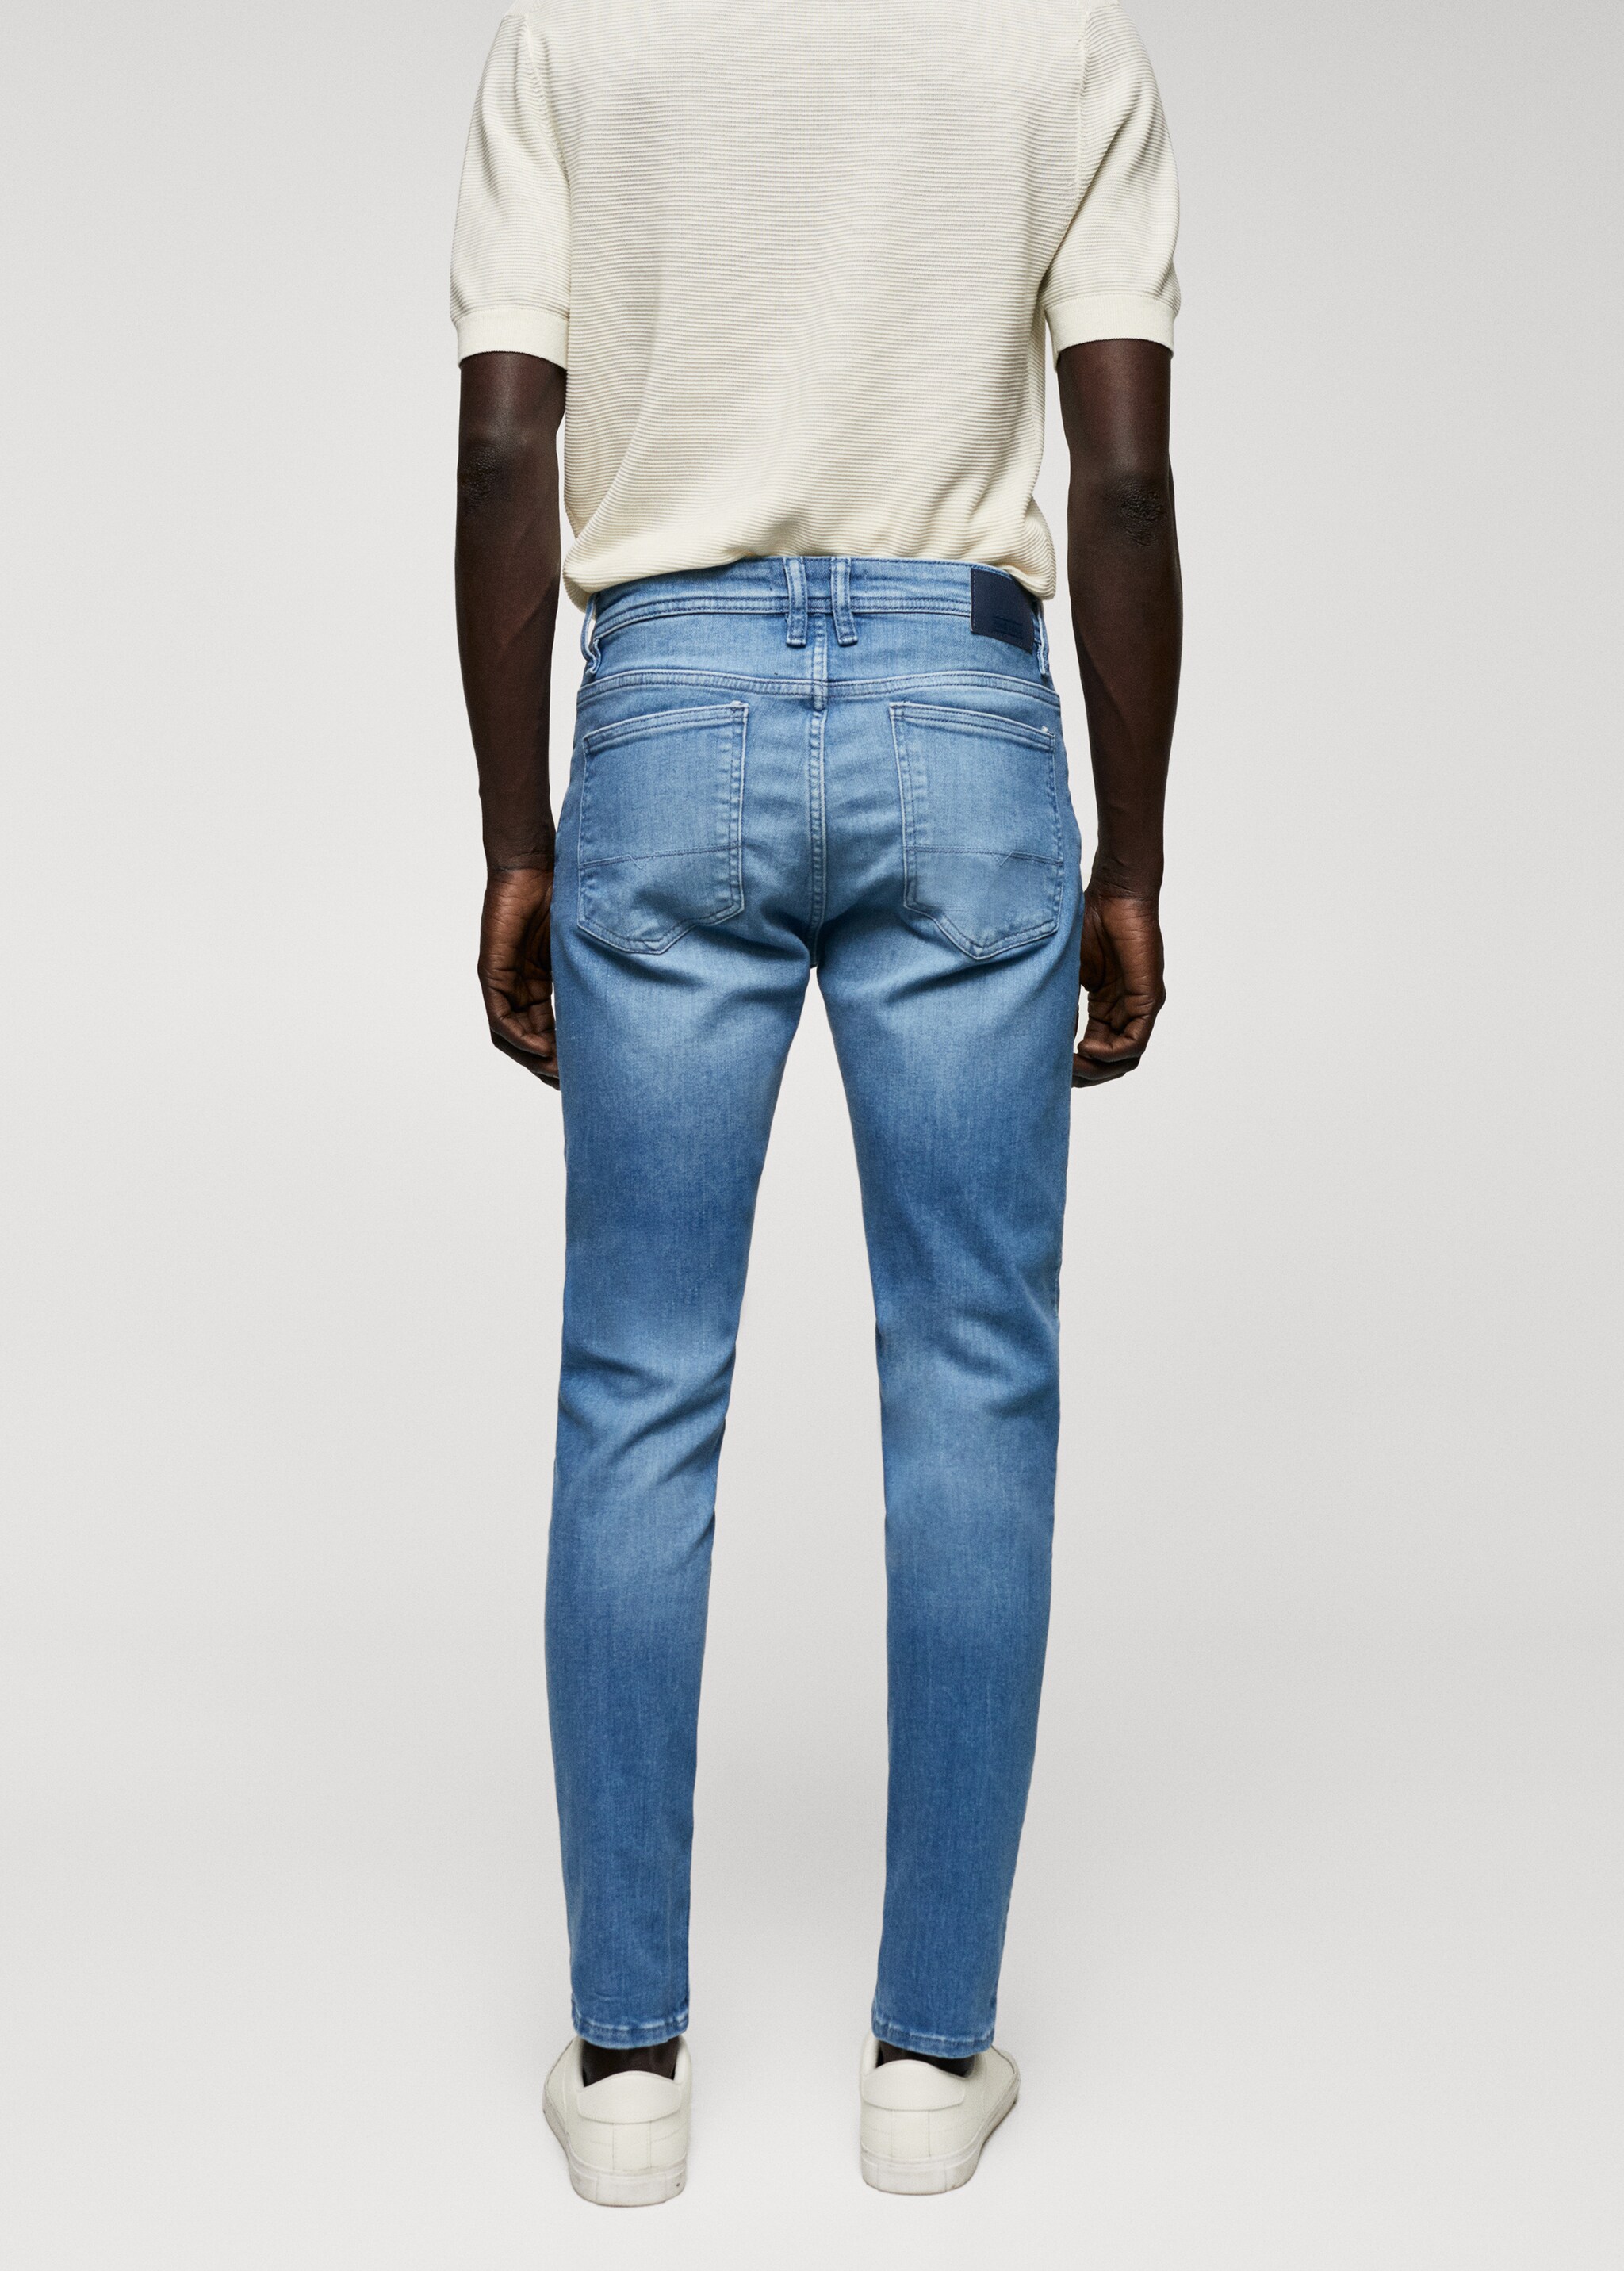 Premium skinny jeans - Reverse of the article